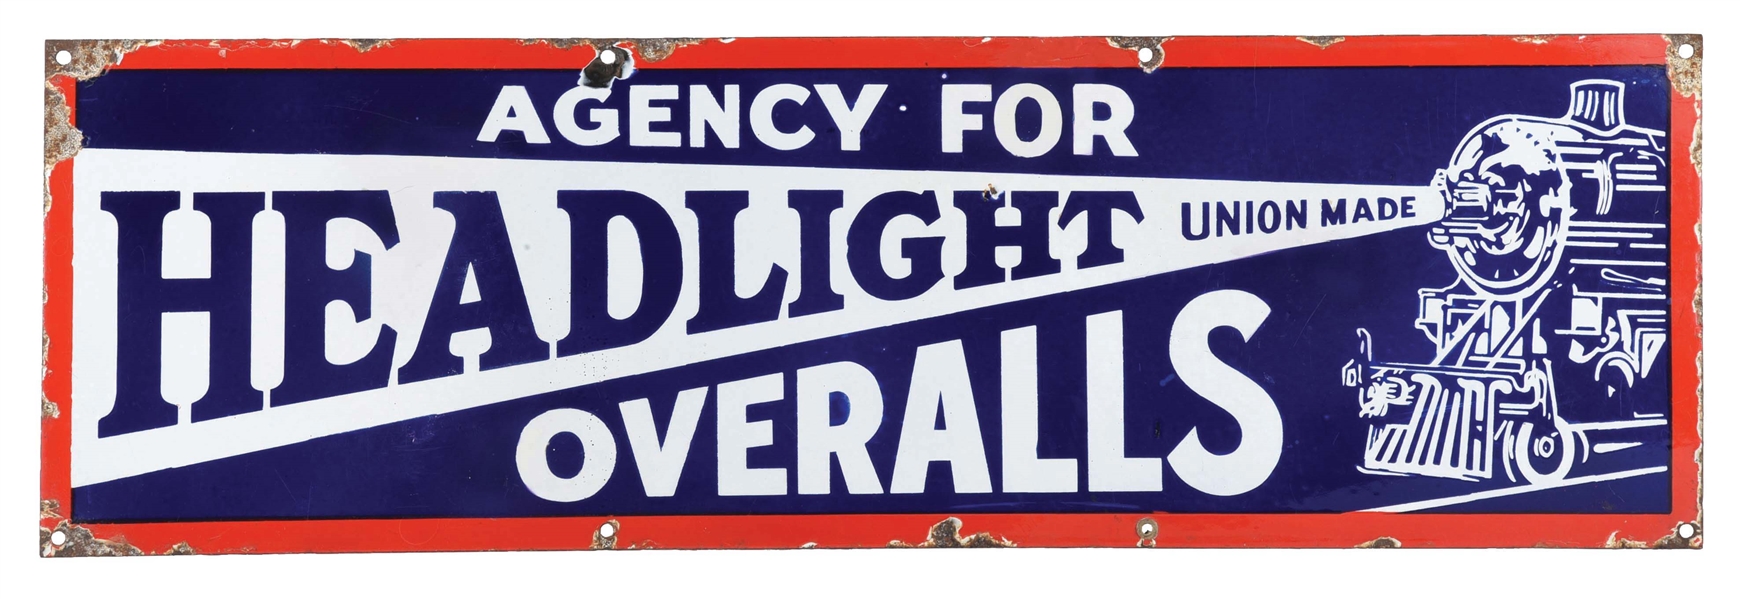 HEADLIGHT UNION MADE OVERALLS PORCELAIN SIGN W/ TRAIN GRAPHIC. 